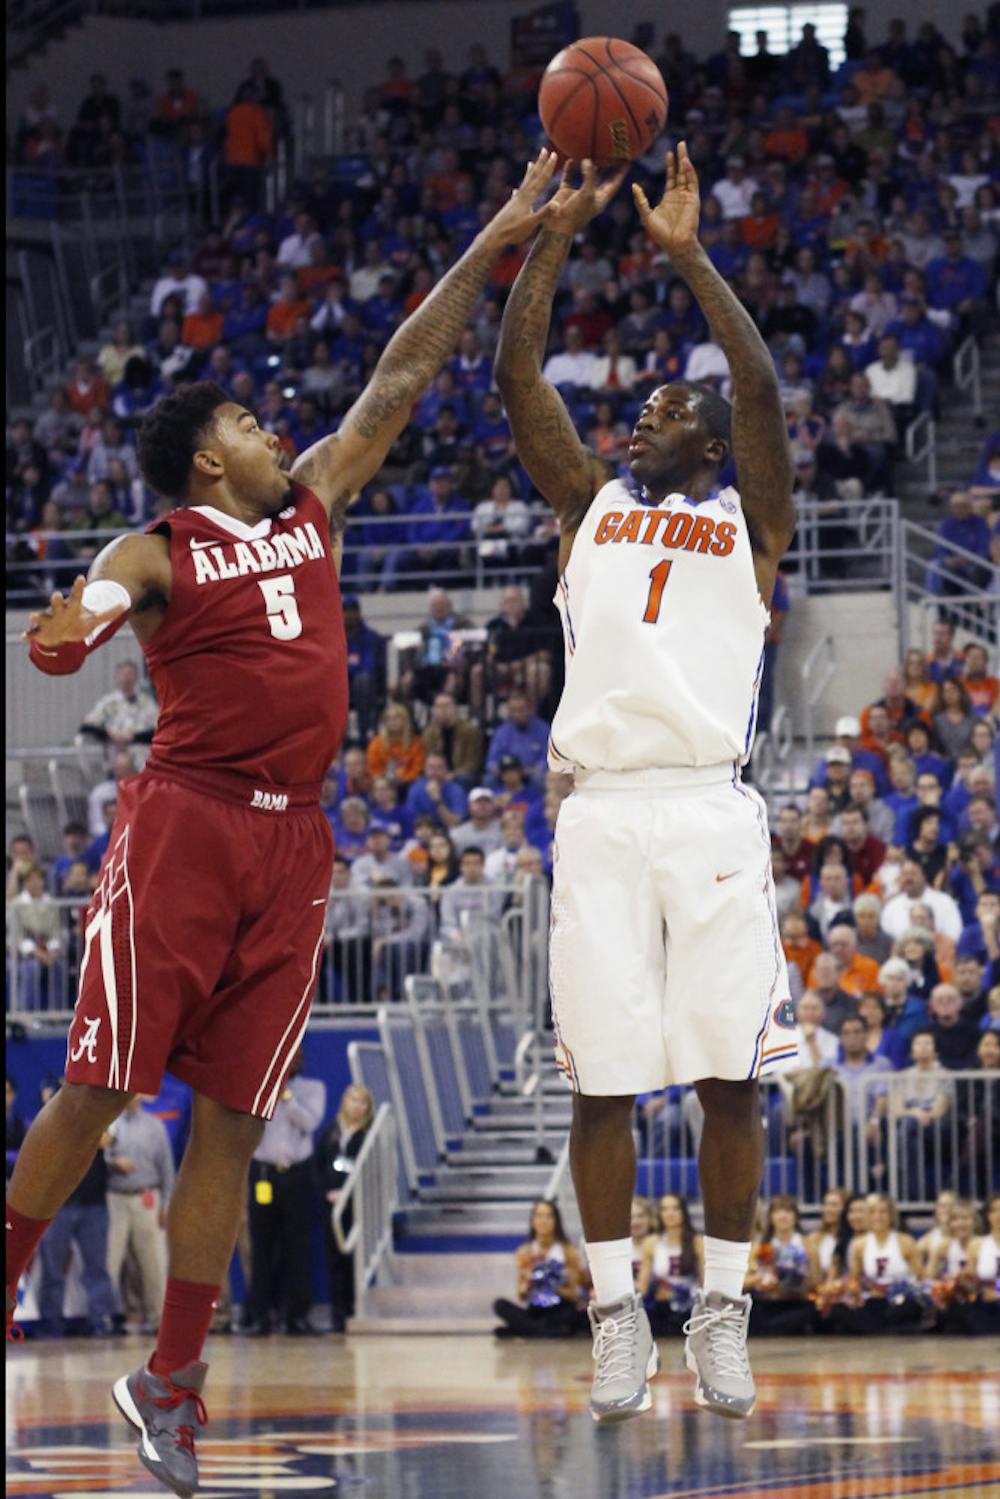 <p>Kenny Boynton attempts a shot over the outstretched arm of an Alabama defender. Boynton ranks No. 2 on Florida's all-time scoring list.</p>